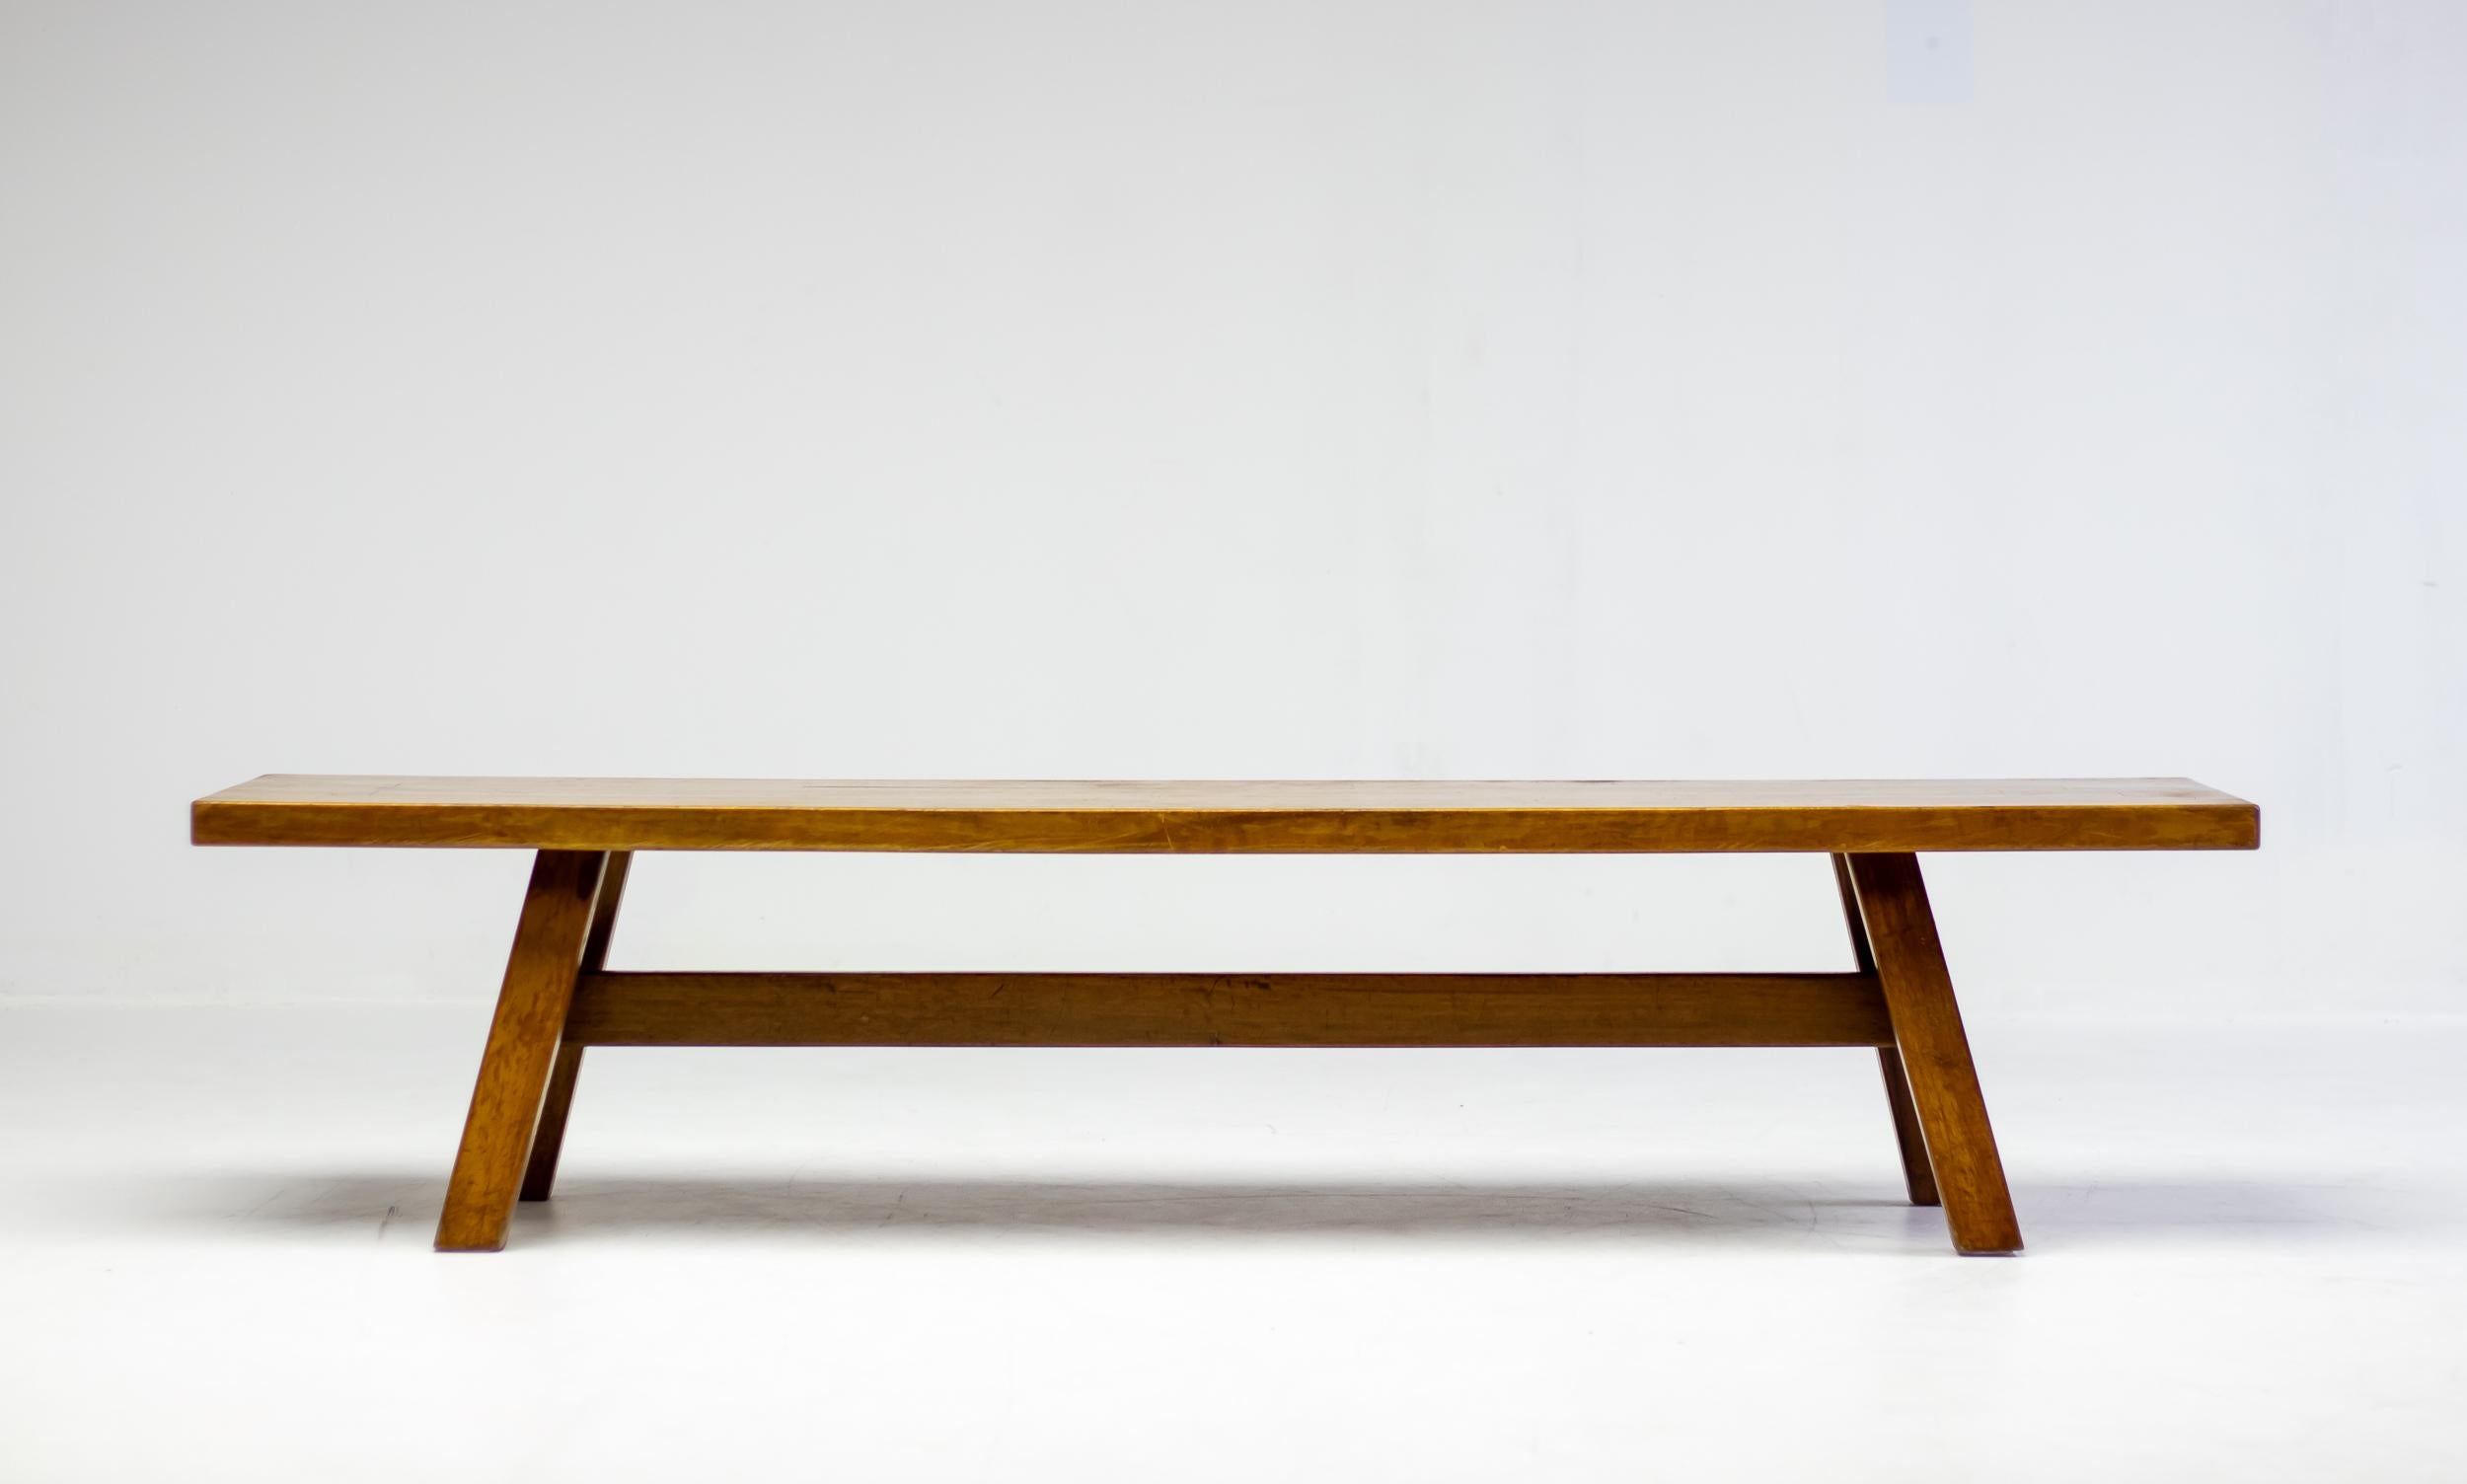 Bench from the Torbecchia series, designed by brutalist architect Giovanni Michelucci for Poltronova, 1964. 
Solid walnut structure with beautiful edge detail similar to Charlotte Perriand tables. 
This architectural piece will enlighten your